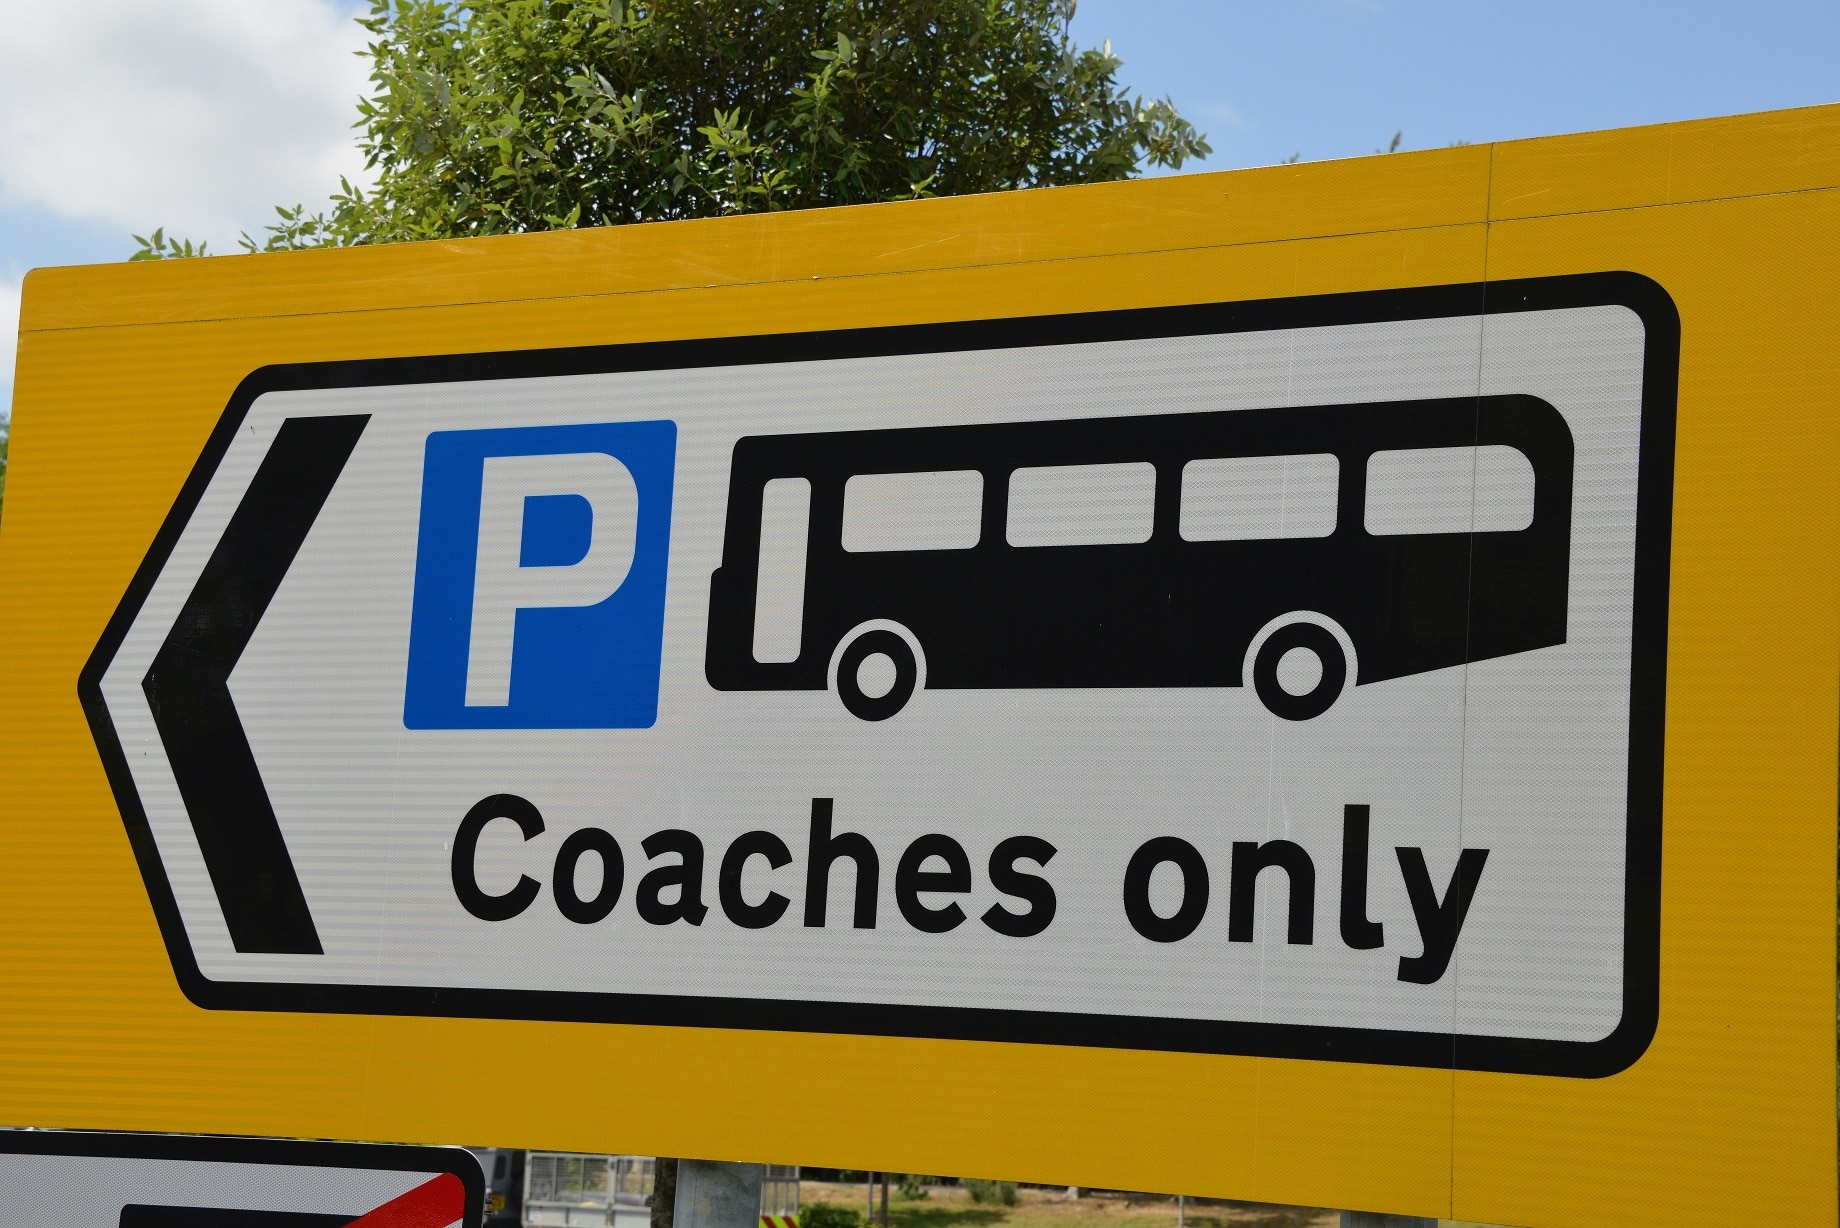 School coach hire rates rising rapidly